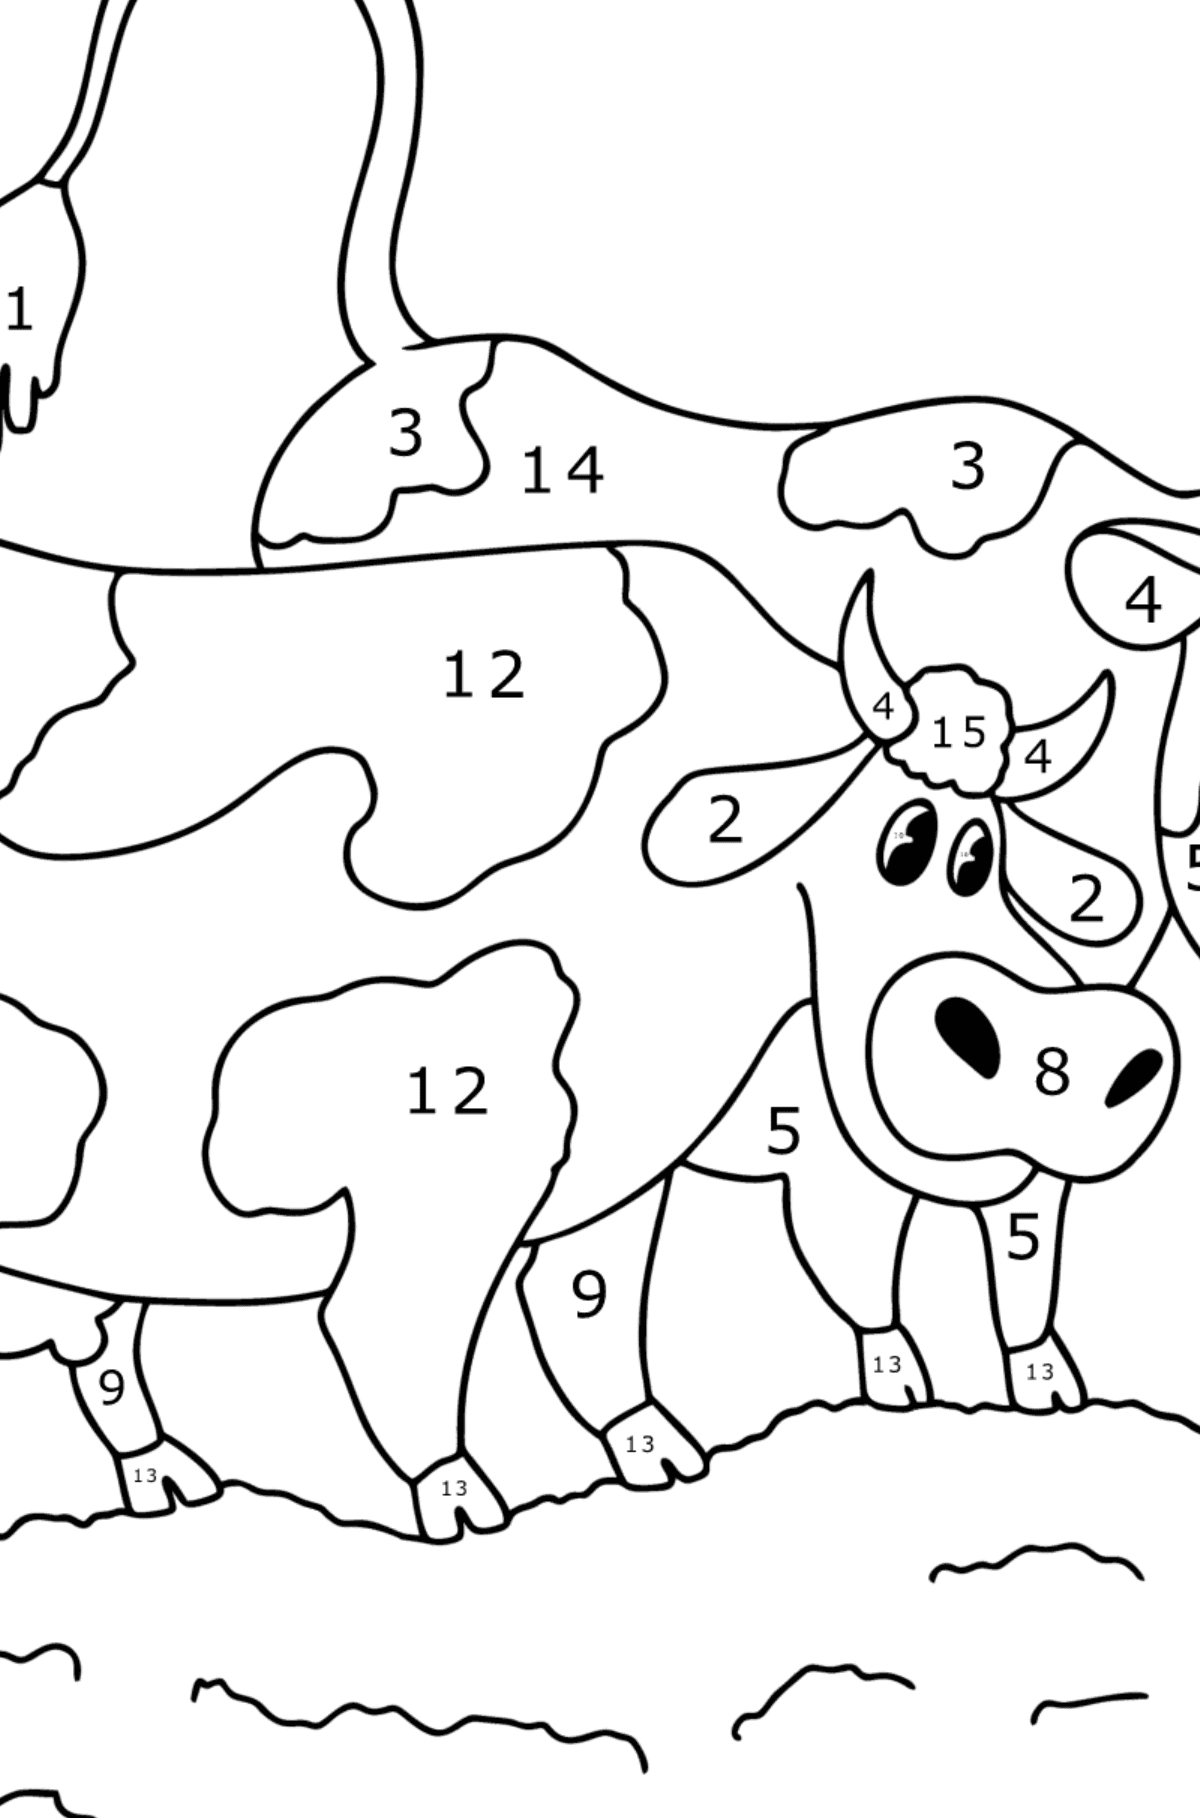 Two cows in the meadow Coloring page - Coloring by Numbers for Kids